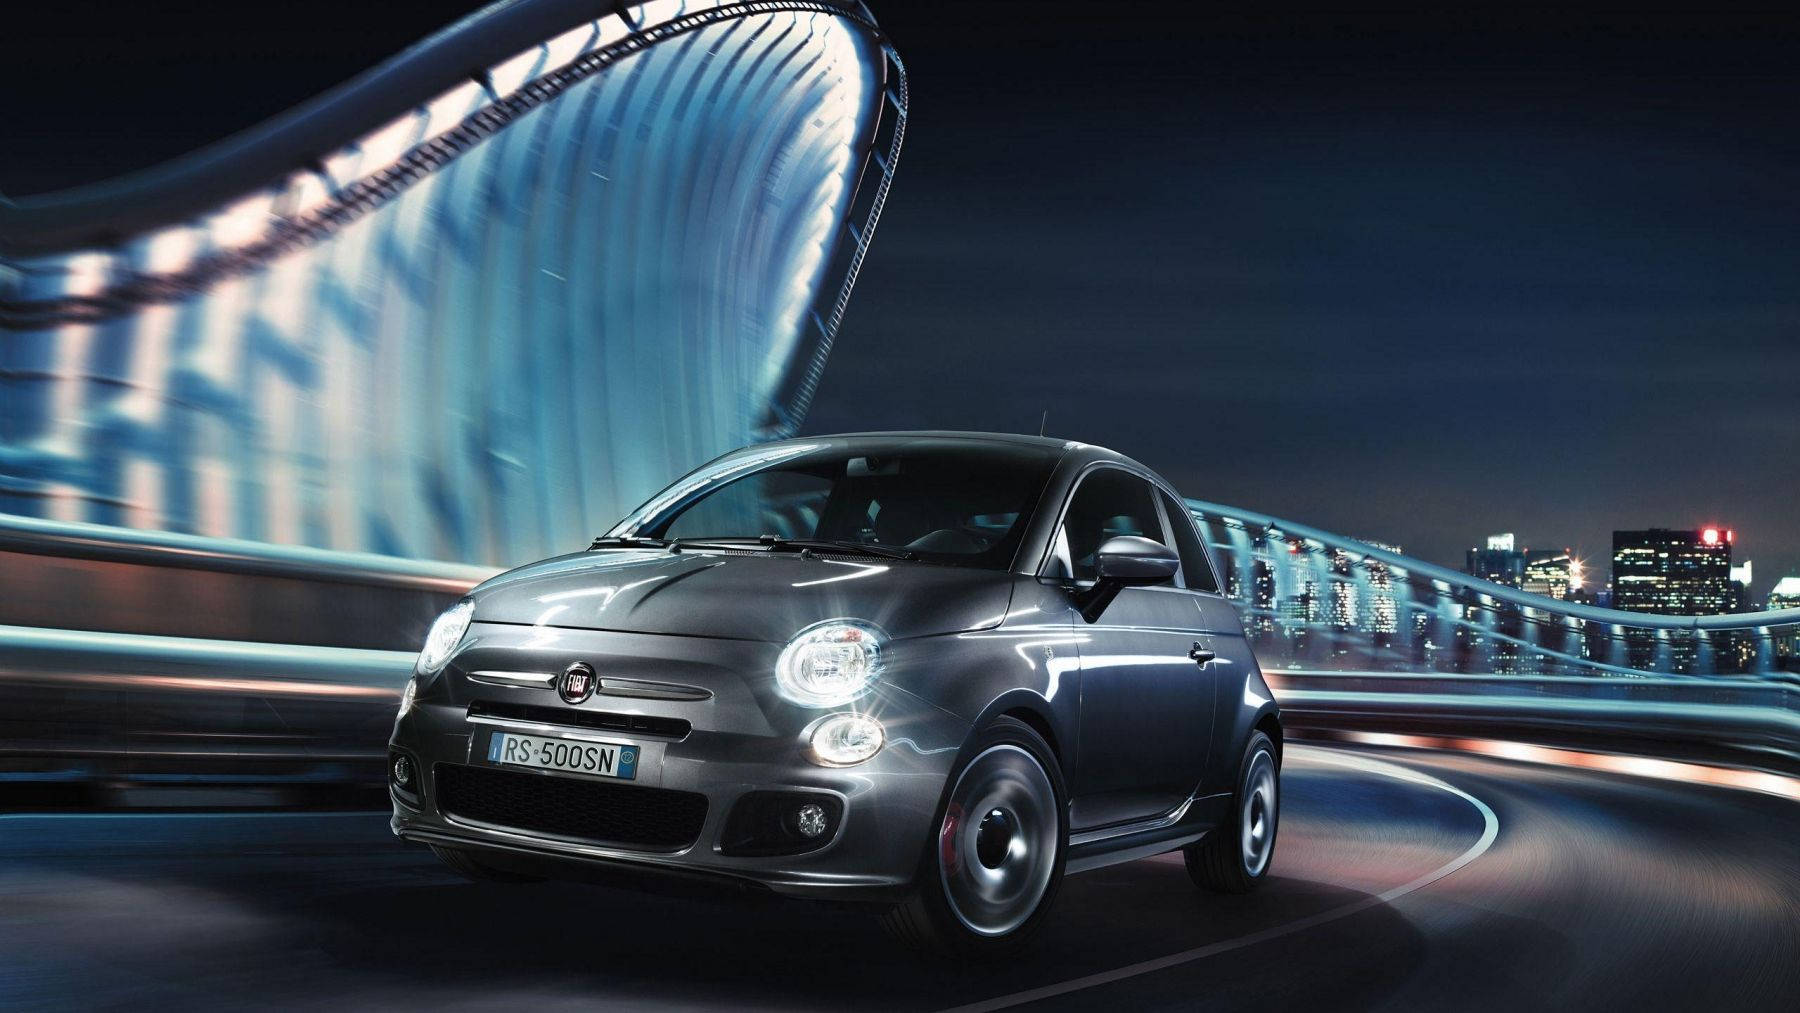 Fiat 500 Driving City Background